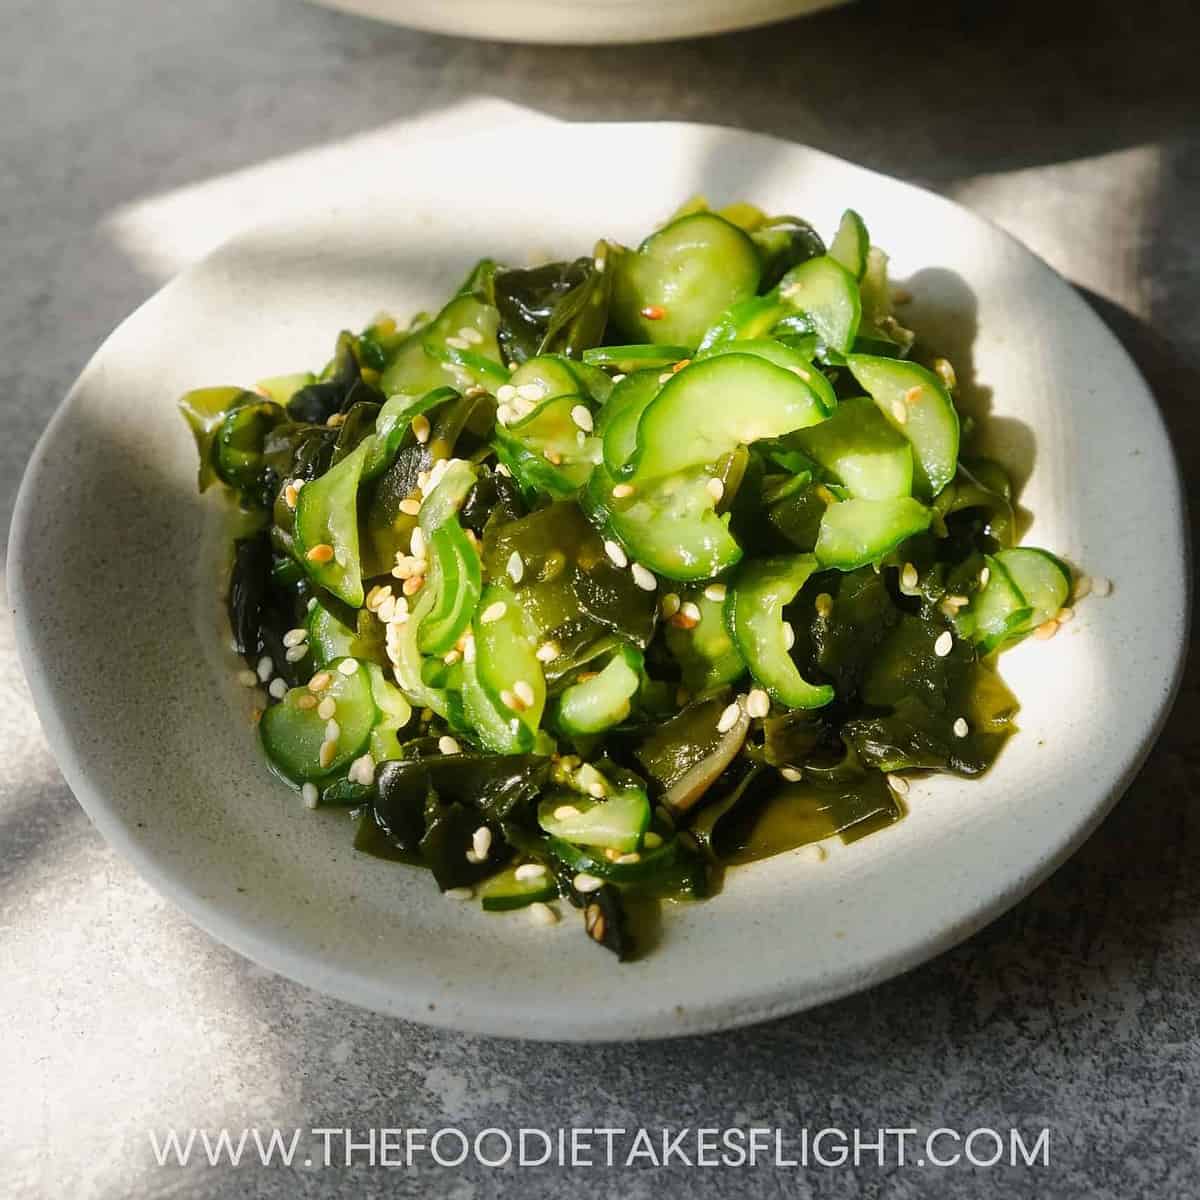  When Seaweed Meets Cucumber: A Burst of Flavor